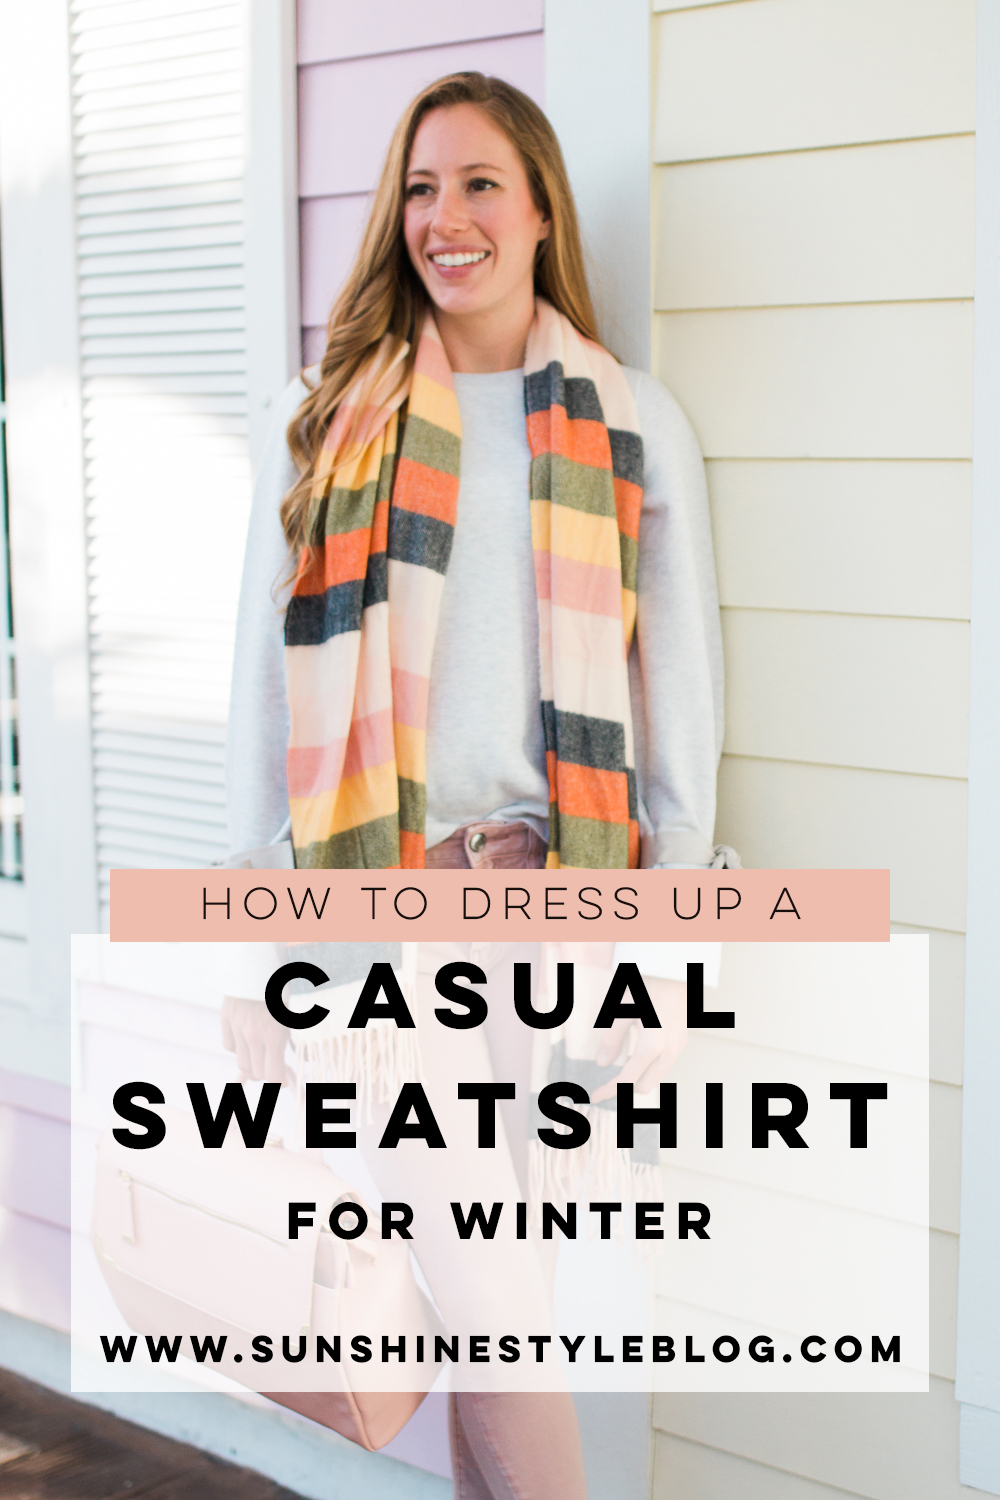 How to Dress Up a Casual Sweatshirt for Winter + 10 Beautiful Scarves Under $50